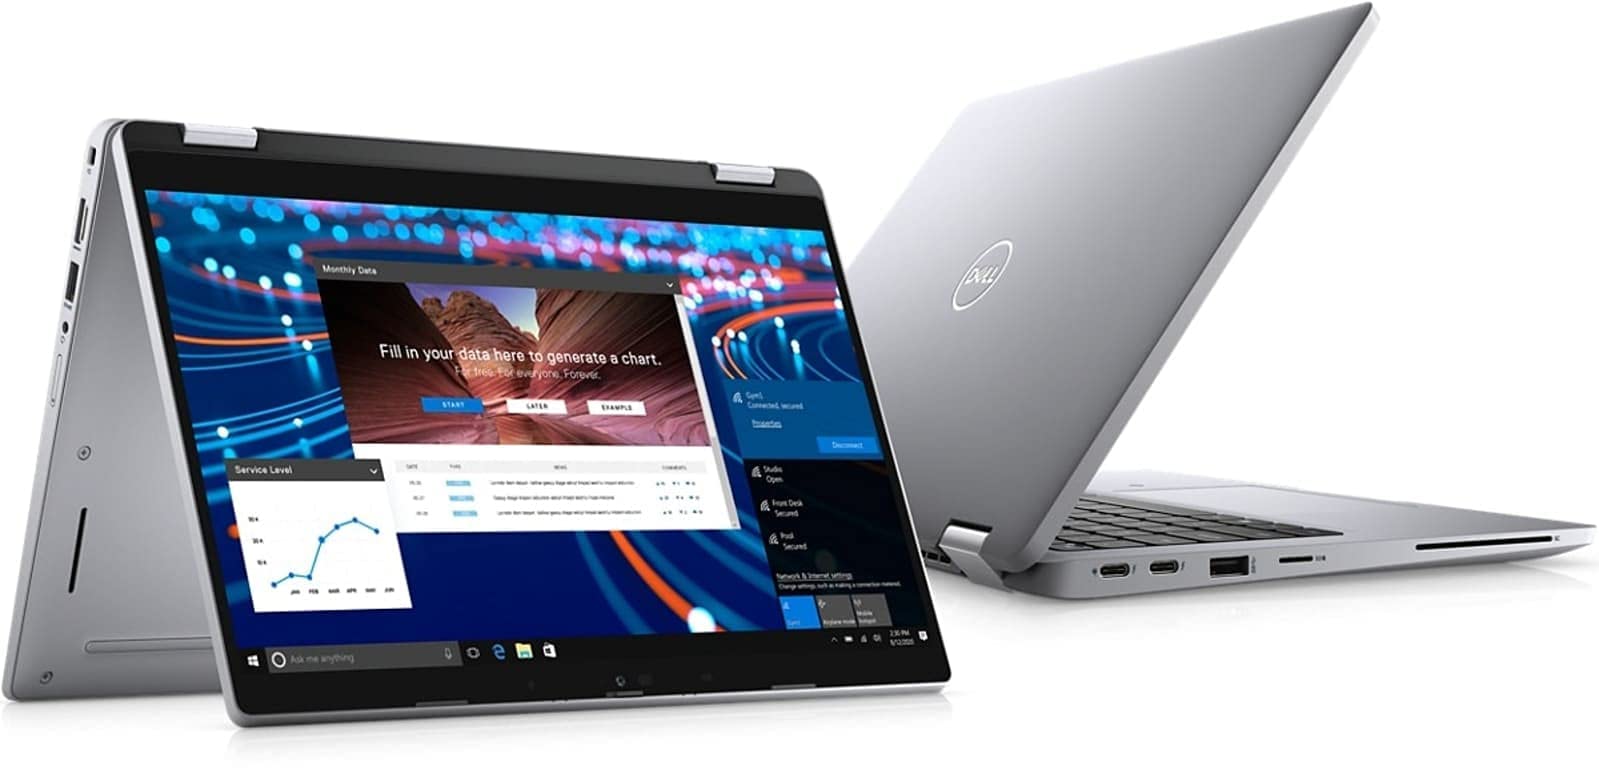 Dell Latitude 5000 5320 2-in-1 (2021) | 13.3" FHD Touch | Core i5 - 256GB SSD - 16GB RAM | 4 Cores @ 4.2 GHz - 11th Gen CPU (Renewed)